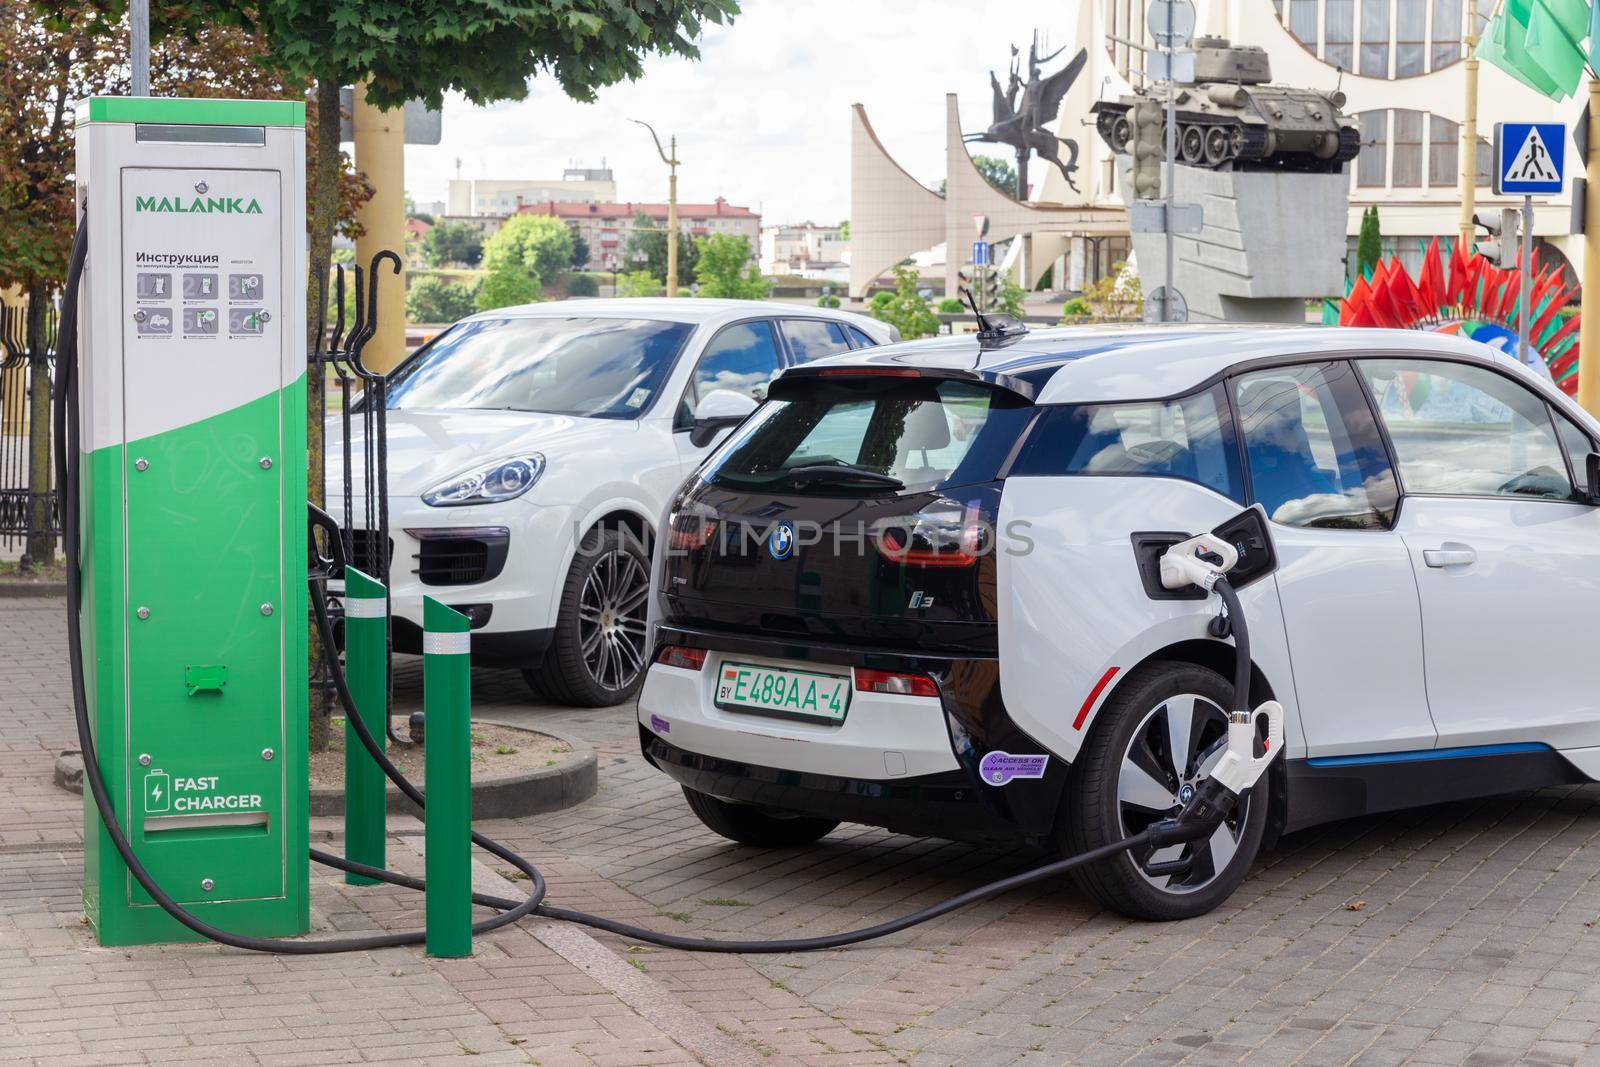 Grodno, Belarus - September 09, 2022: BMW i3 on 50kW fast charging spot Malanka on Soviet square - Car sharing commuter charging station. Charging technology industry transport which are the futuristic of the Automobile.